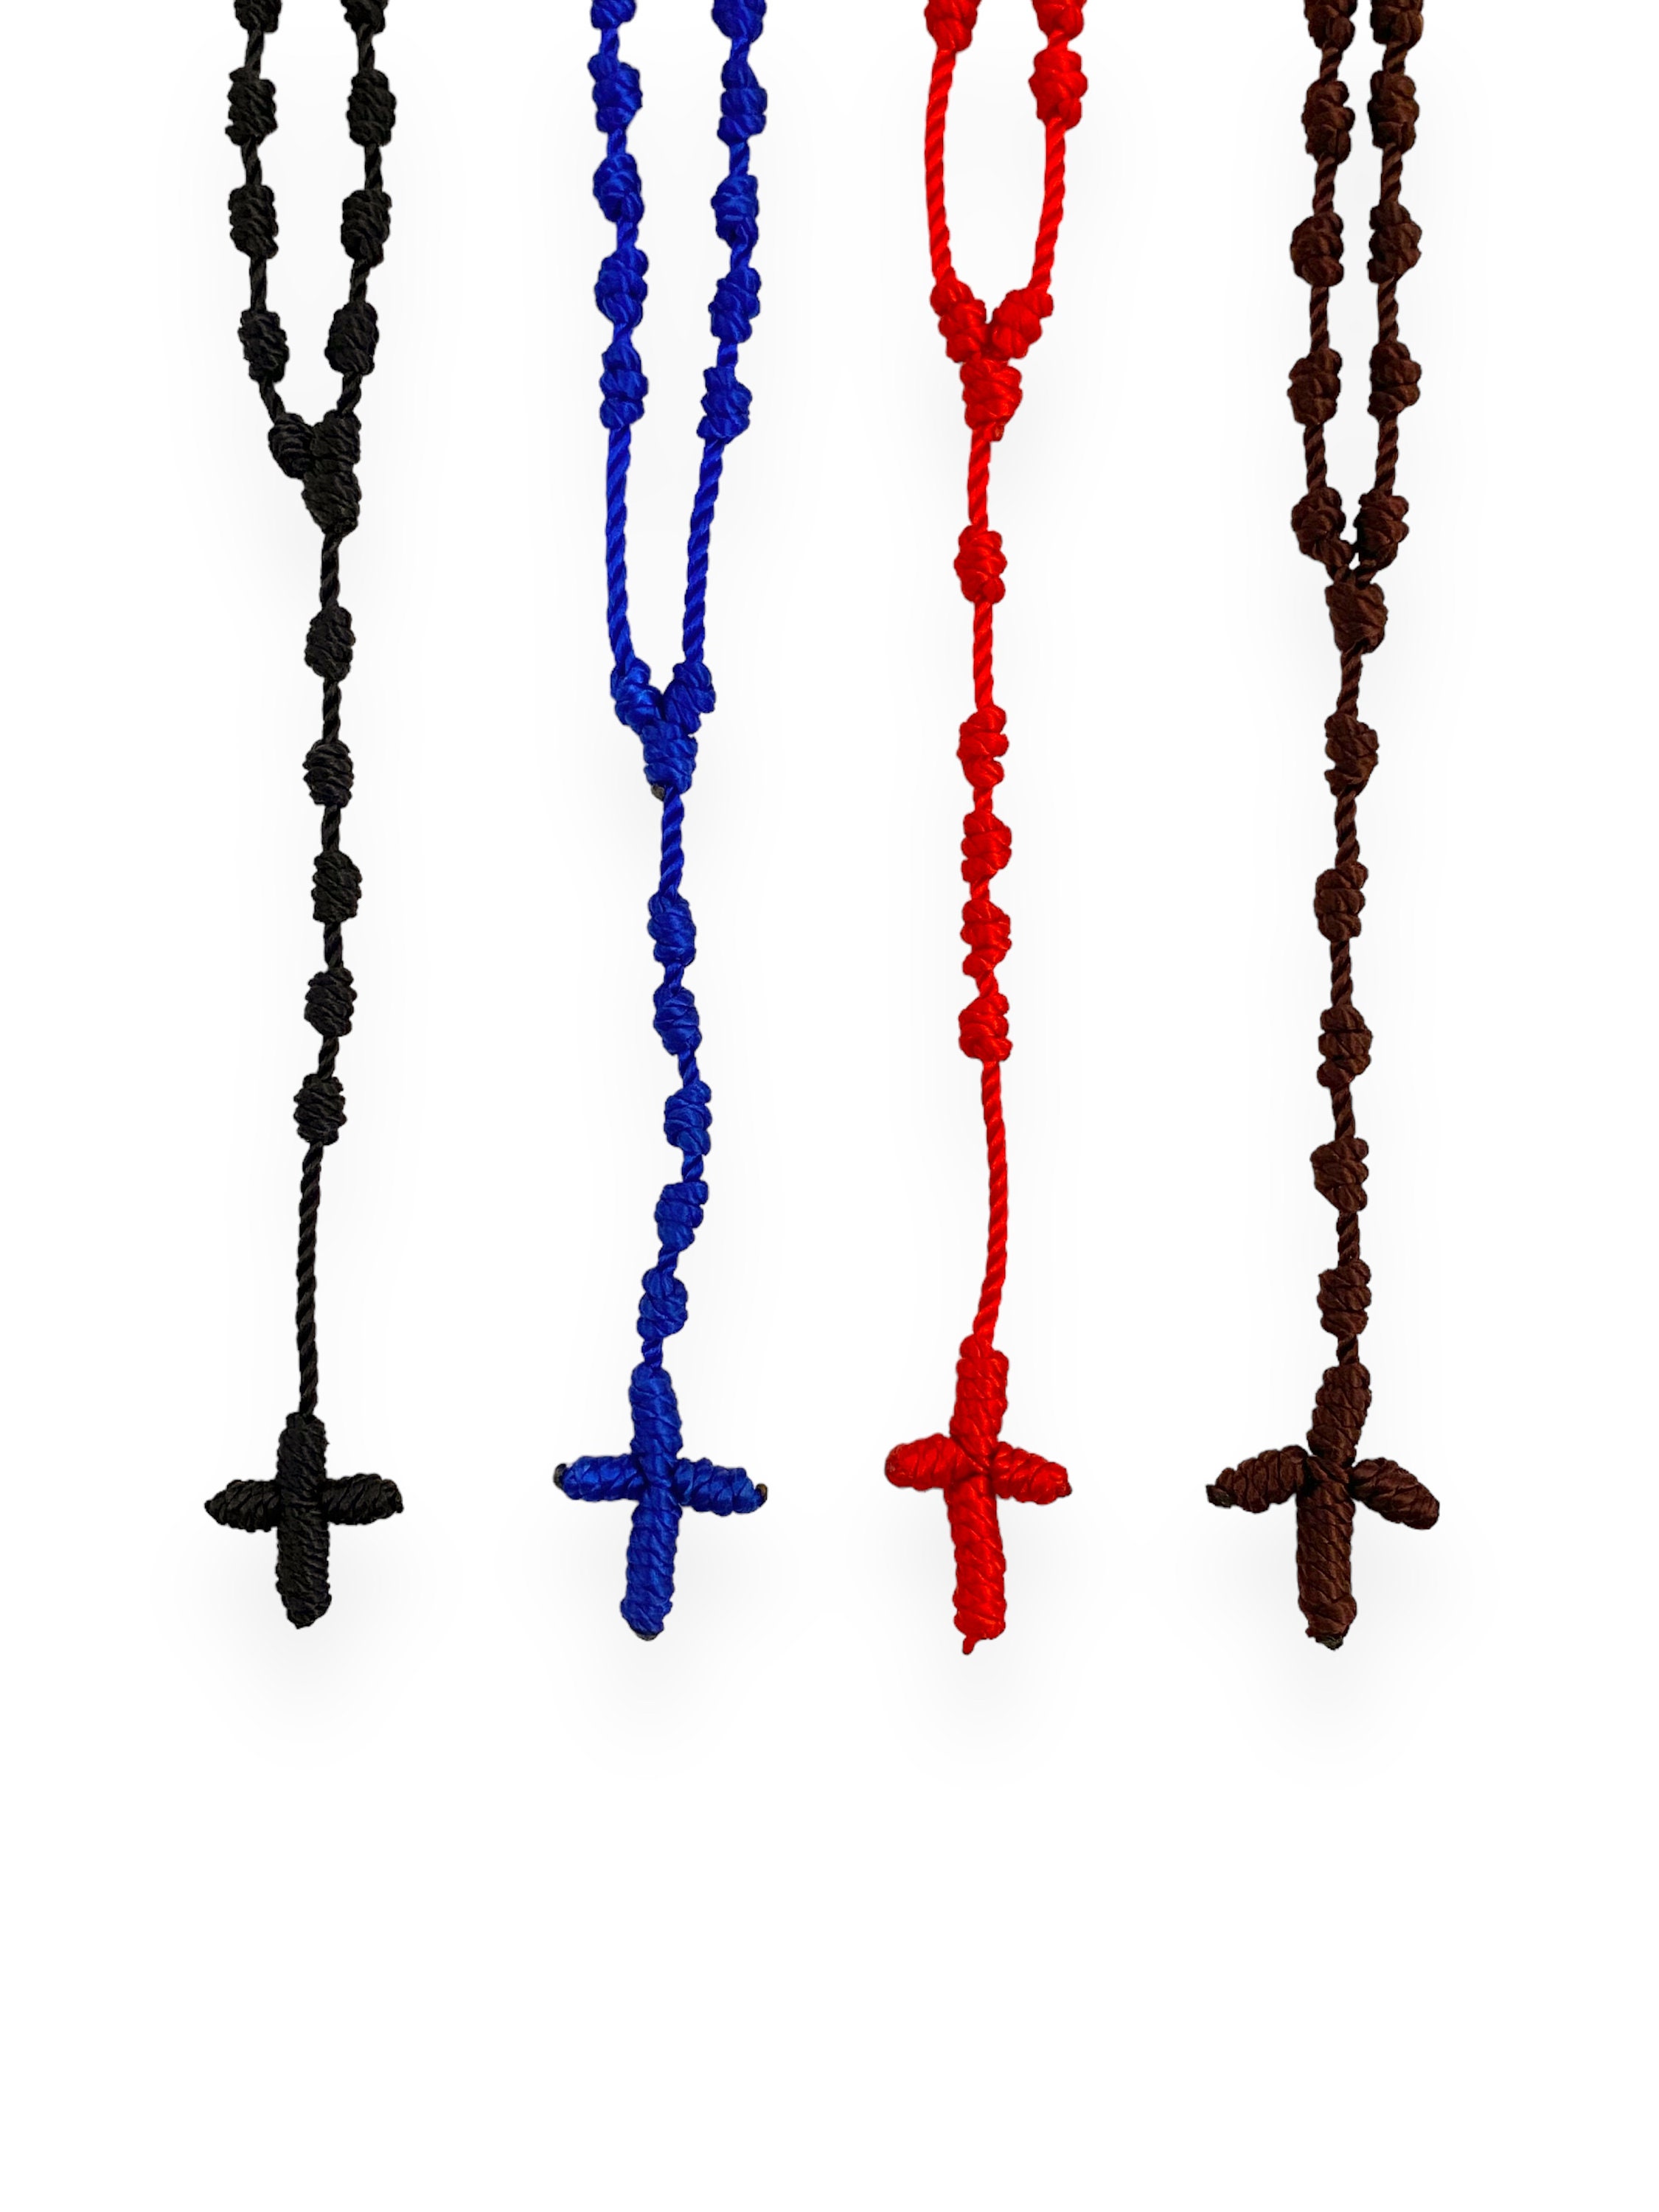 Twine Braided Knotted Rosary Necklace Prayer Corded Roped Catholic